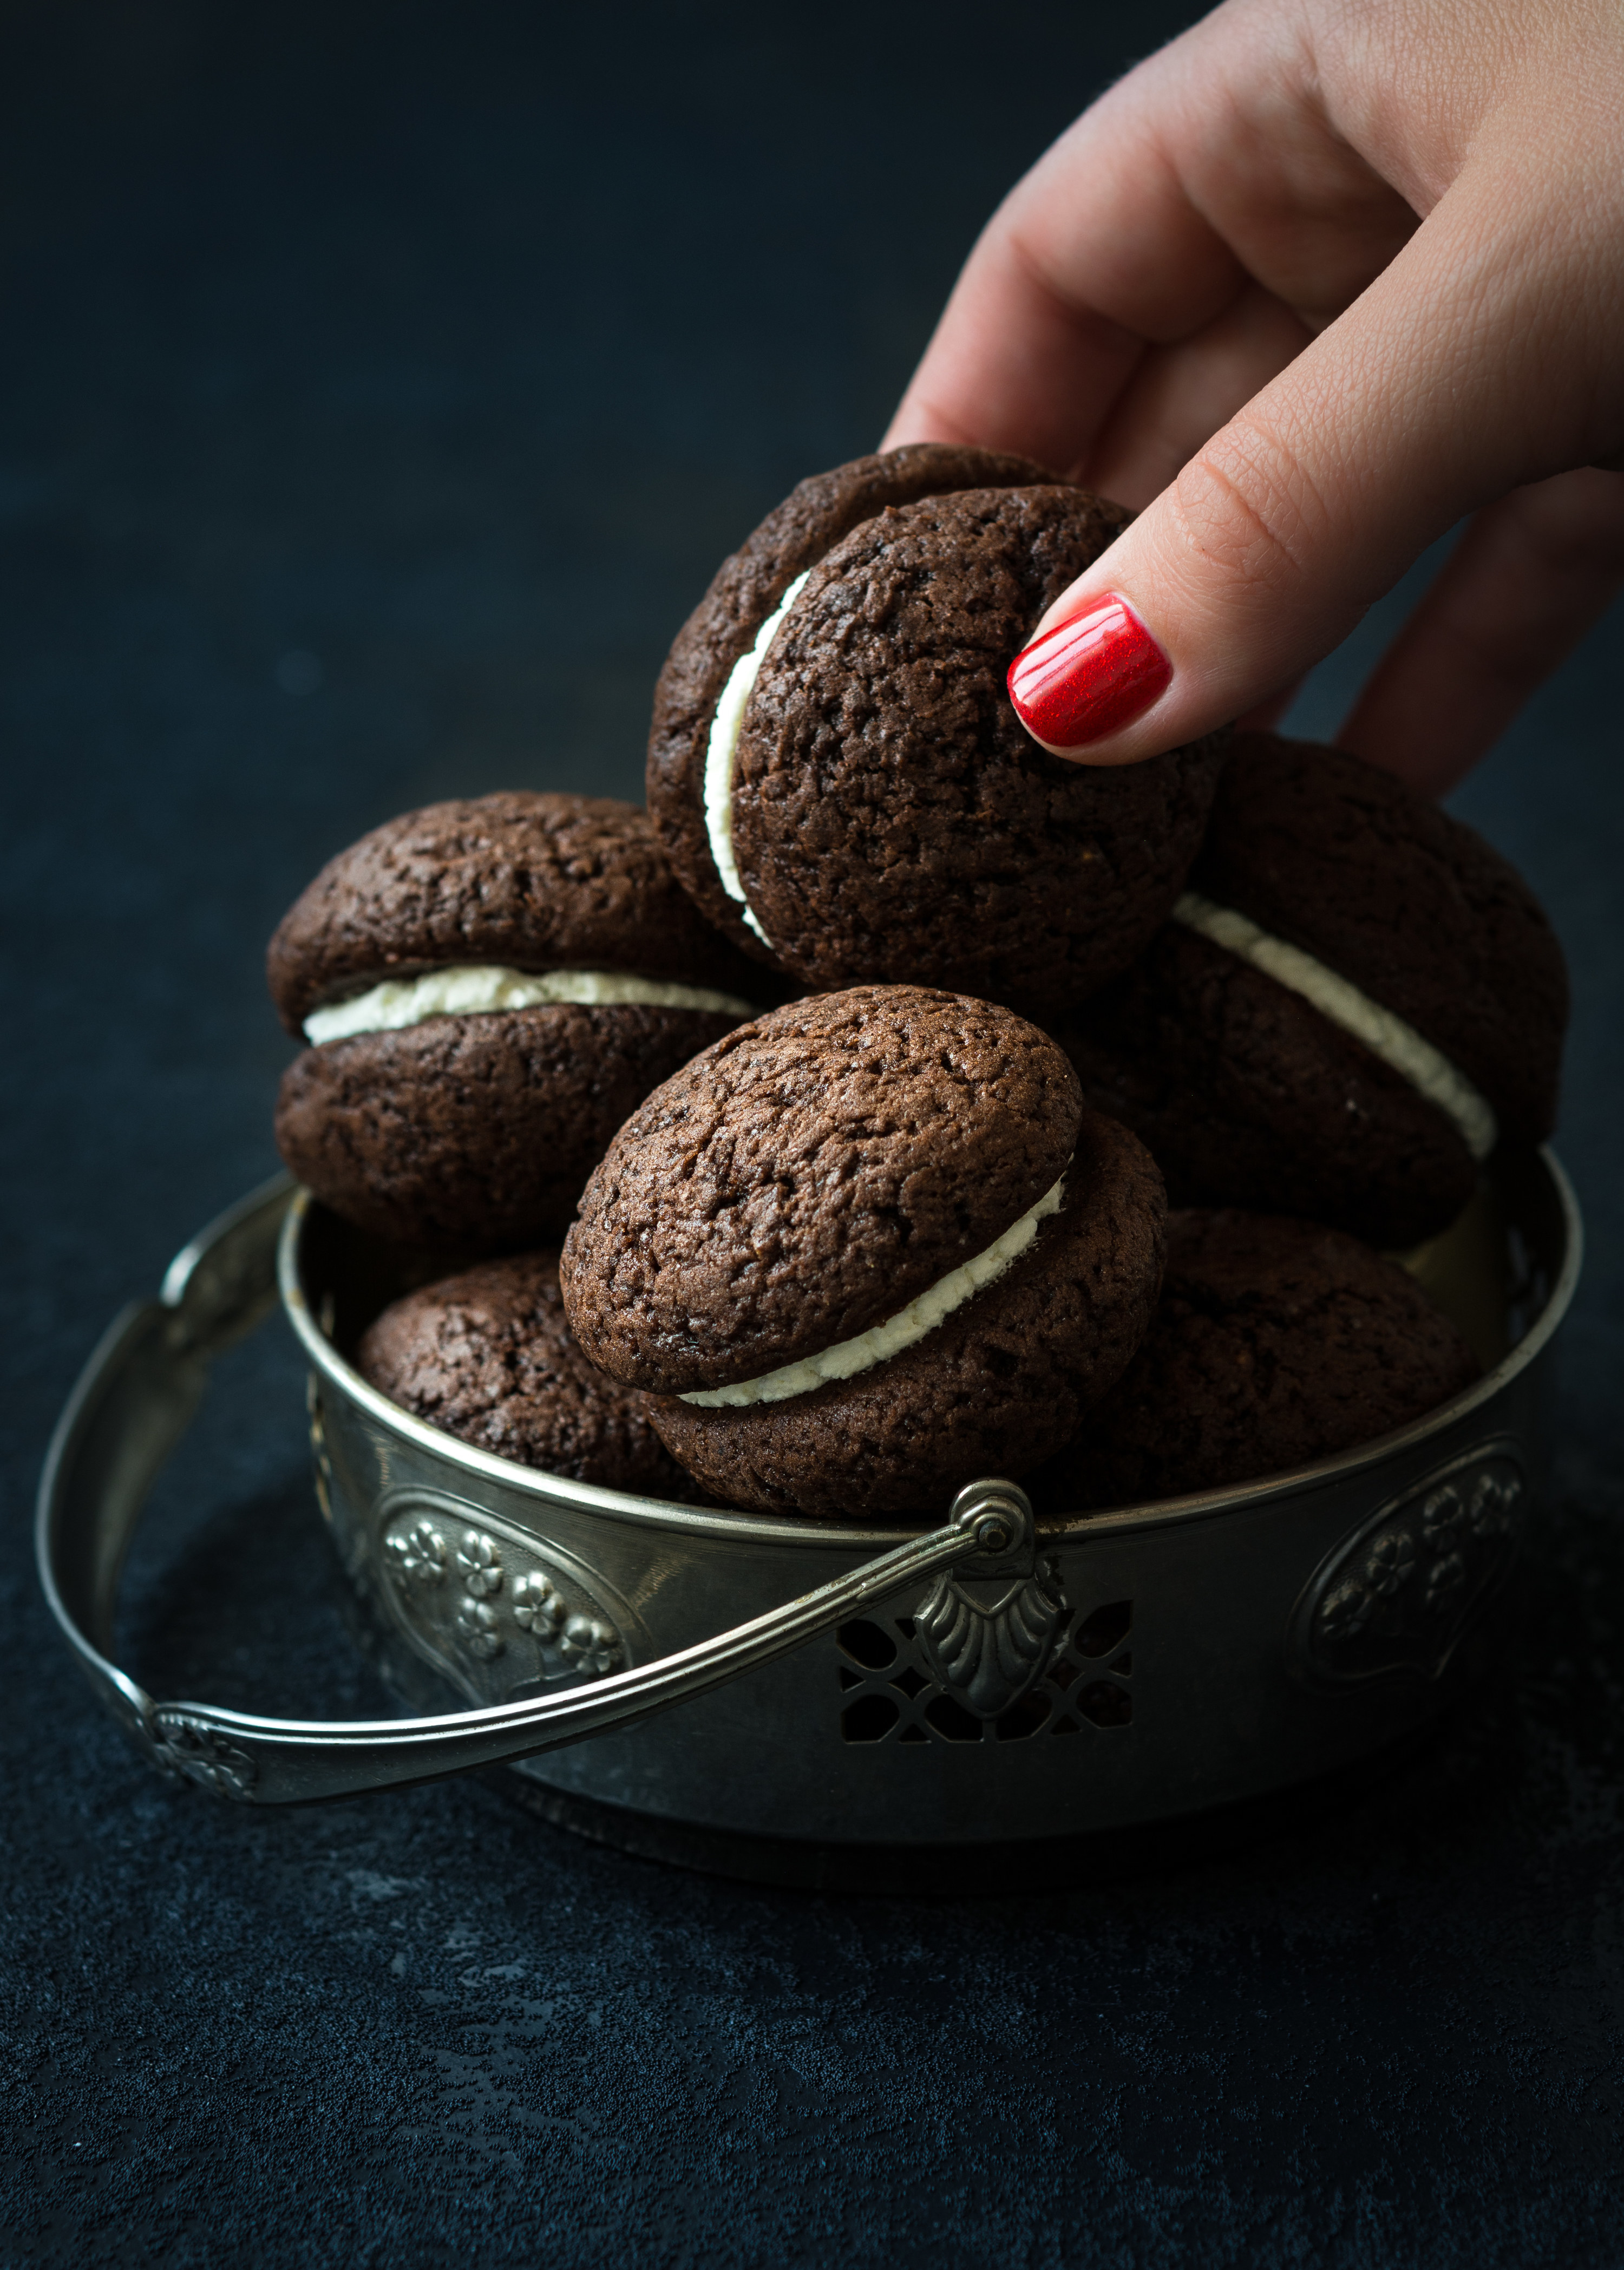 Manicured hand grabbing a dark whoopie pie consisting of chocolate cookies and a cream filling; there is also a metal container containing four more whoopie pies